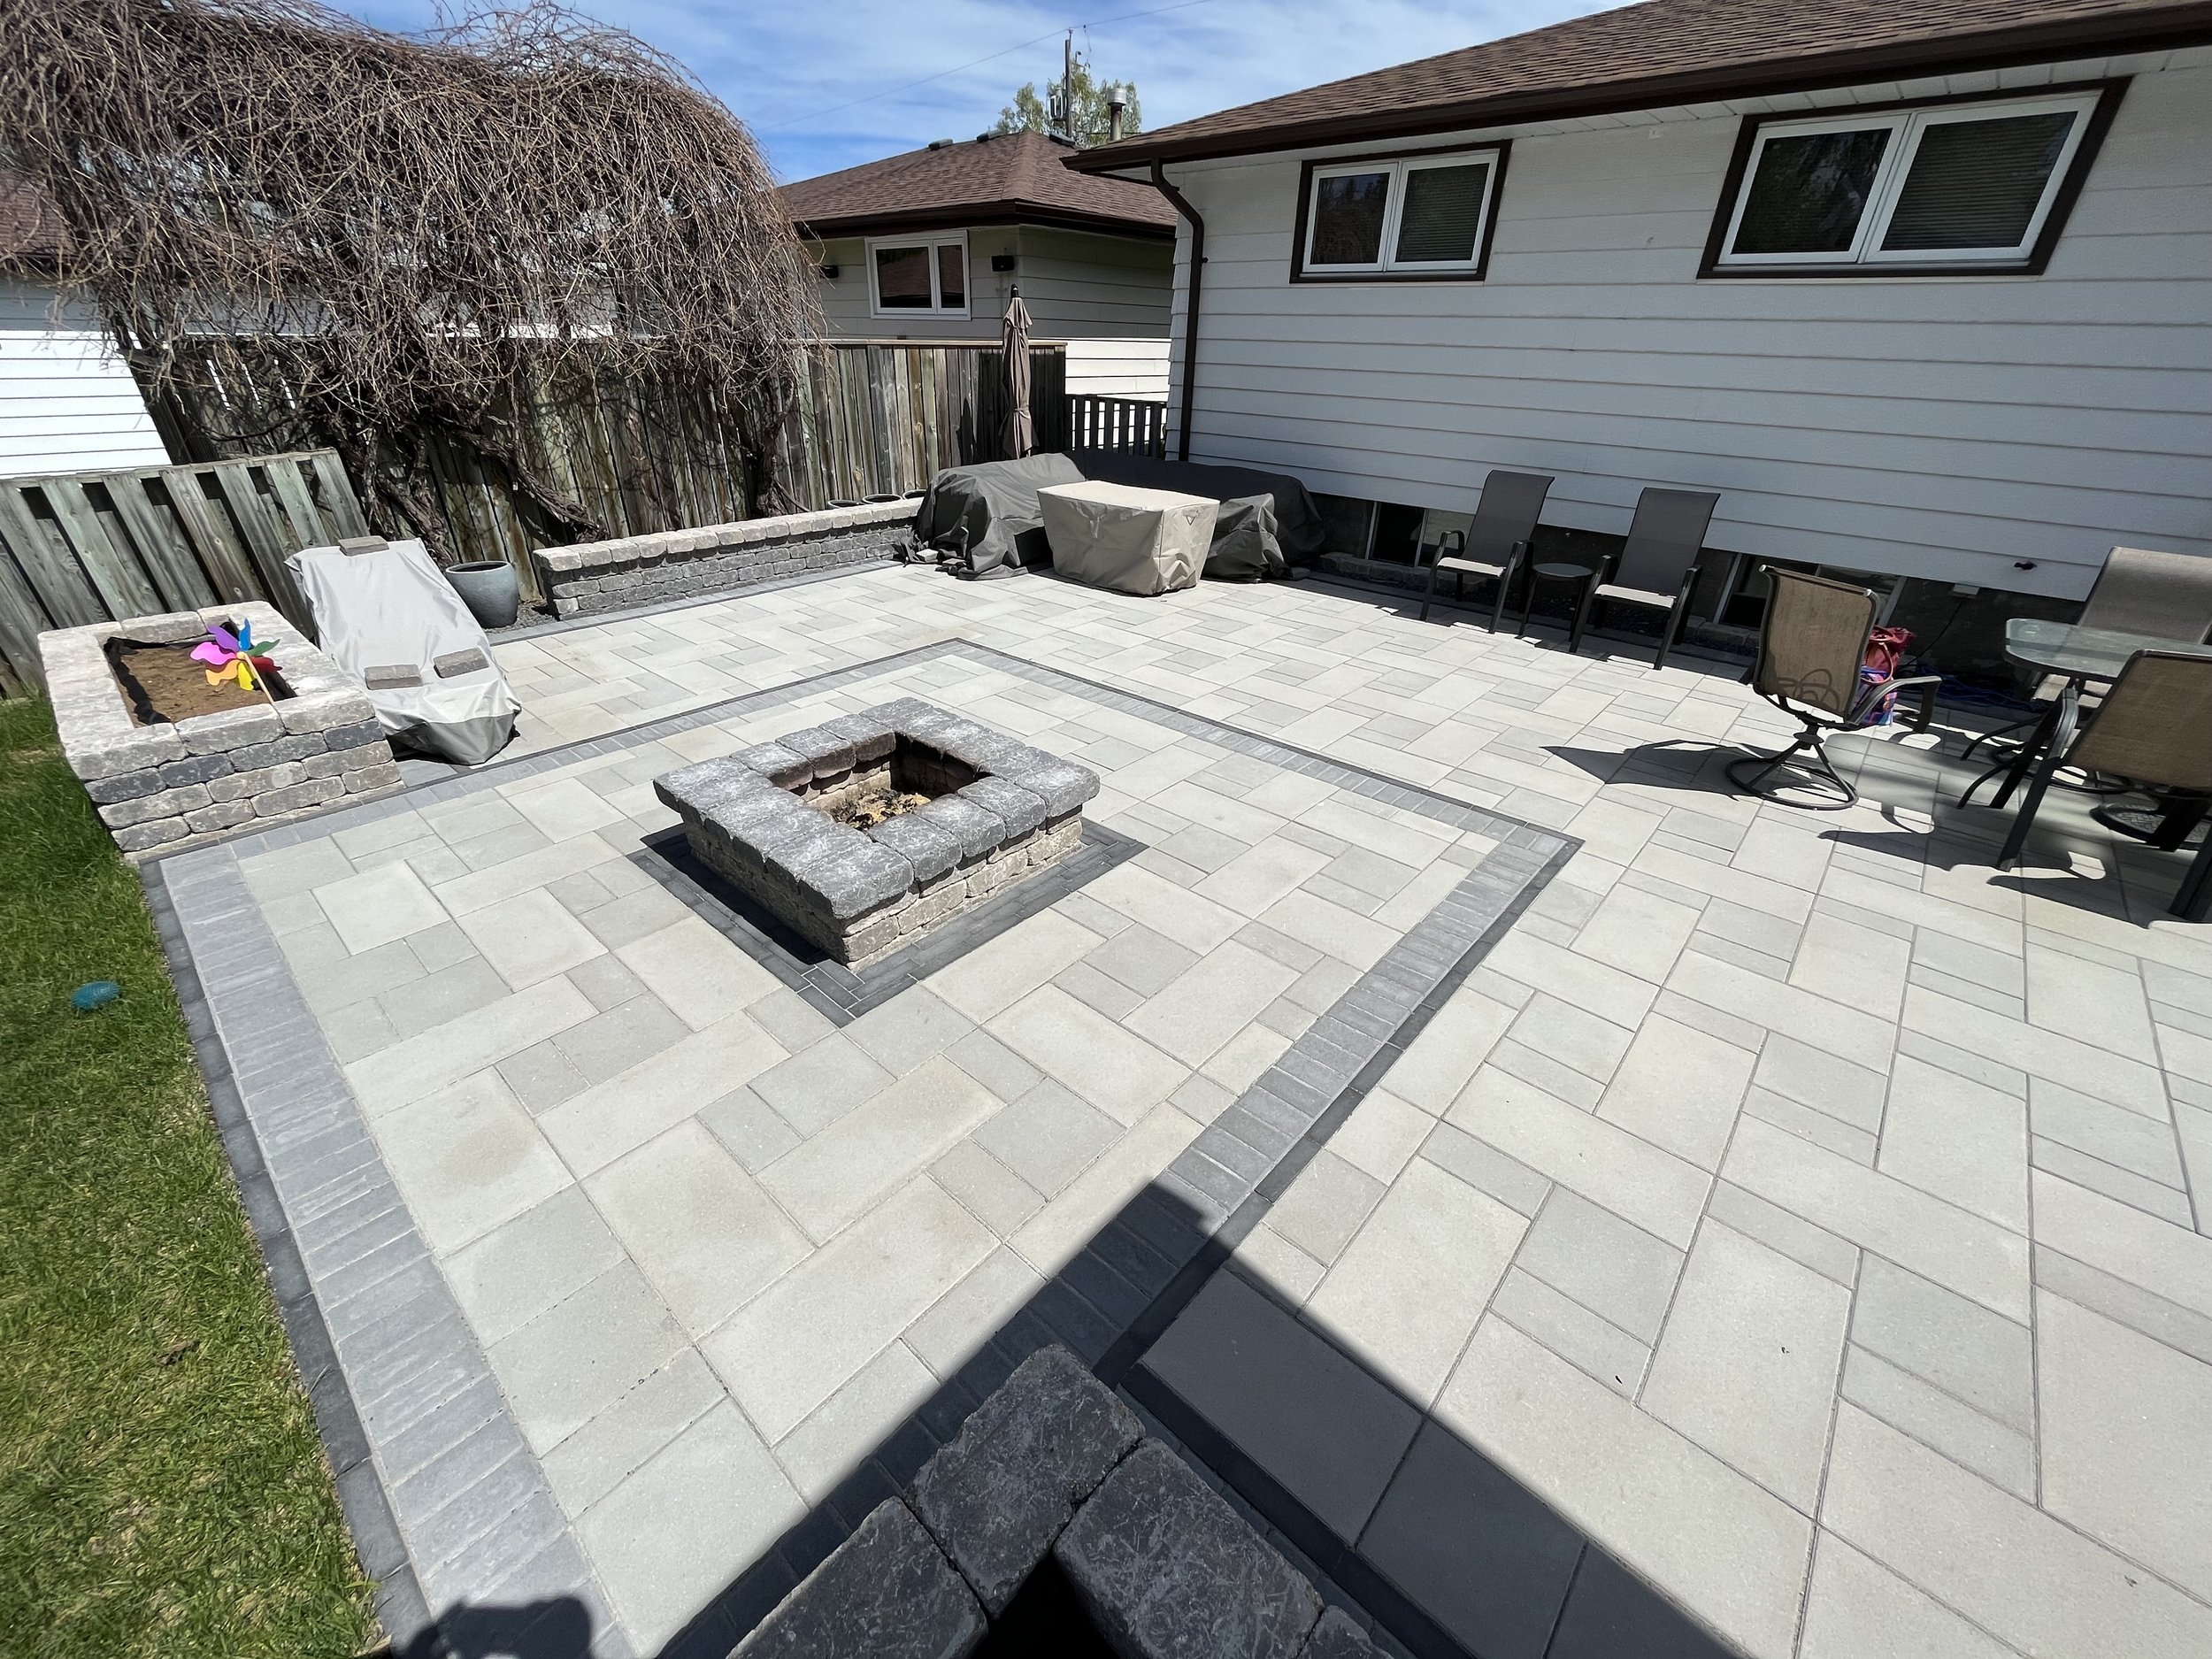  Barkman Broadway Paver patio with a Nordic Stone/westmount (Techo-Bloc) border. Center fire pit feature, as well as some Quarry Stone planter Beds. 